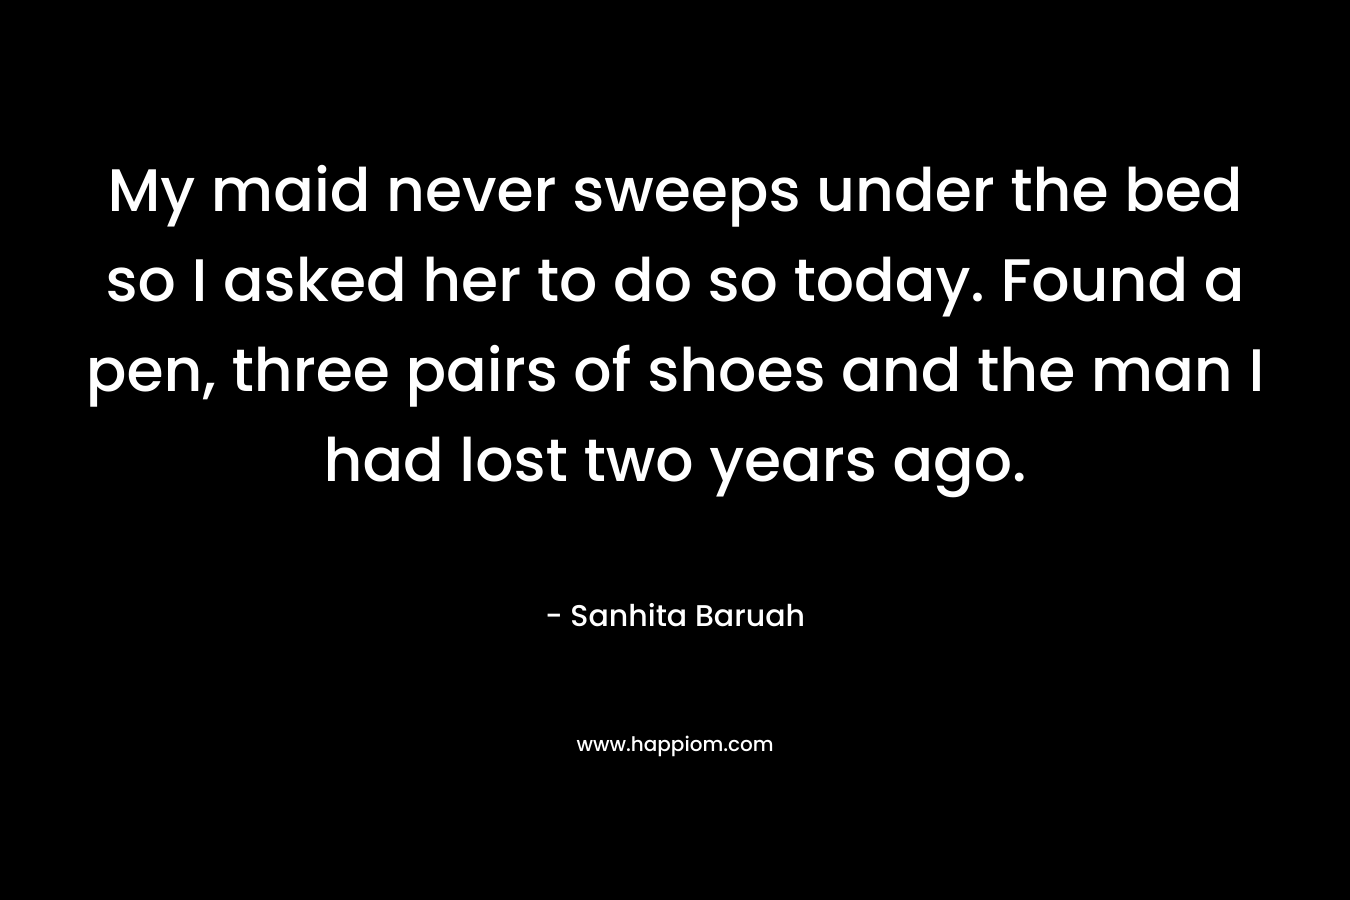 My maid never sweeps under the bed so I asked her to do so today. Found a pen, three pairs of shoes and the man I had lost two years ago. – Sanhita Baruah